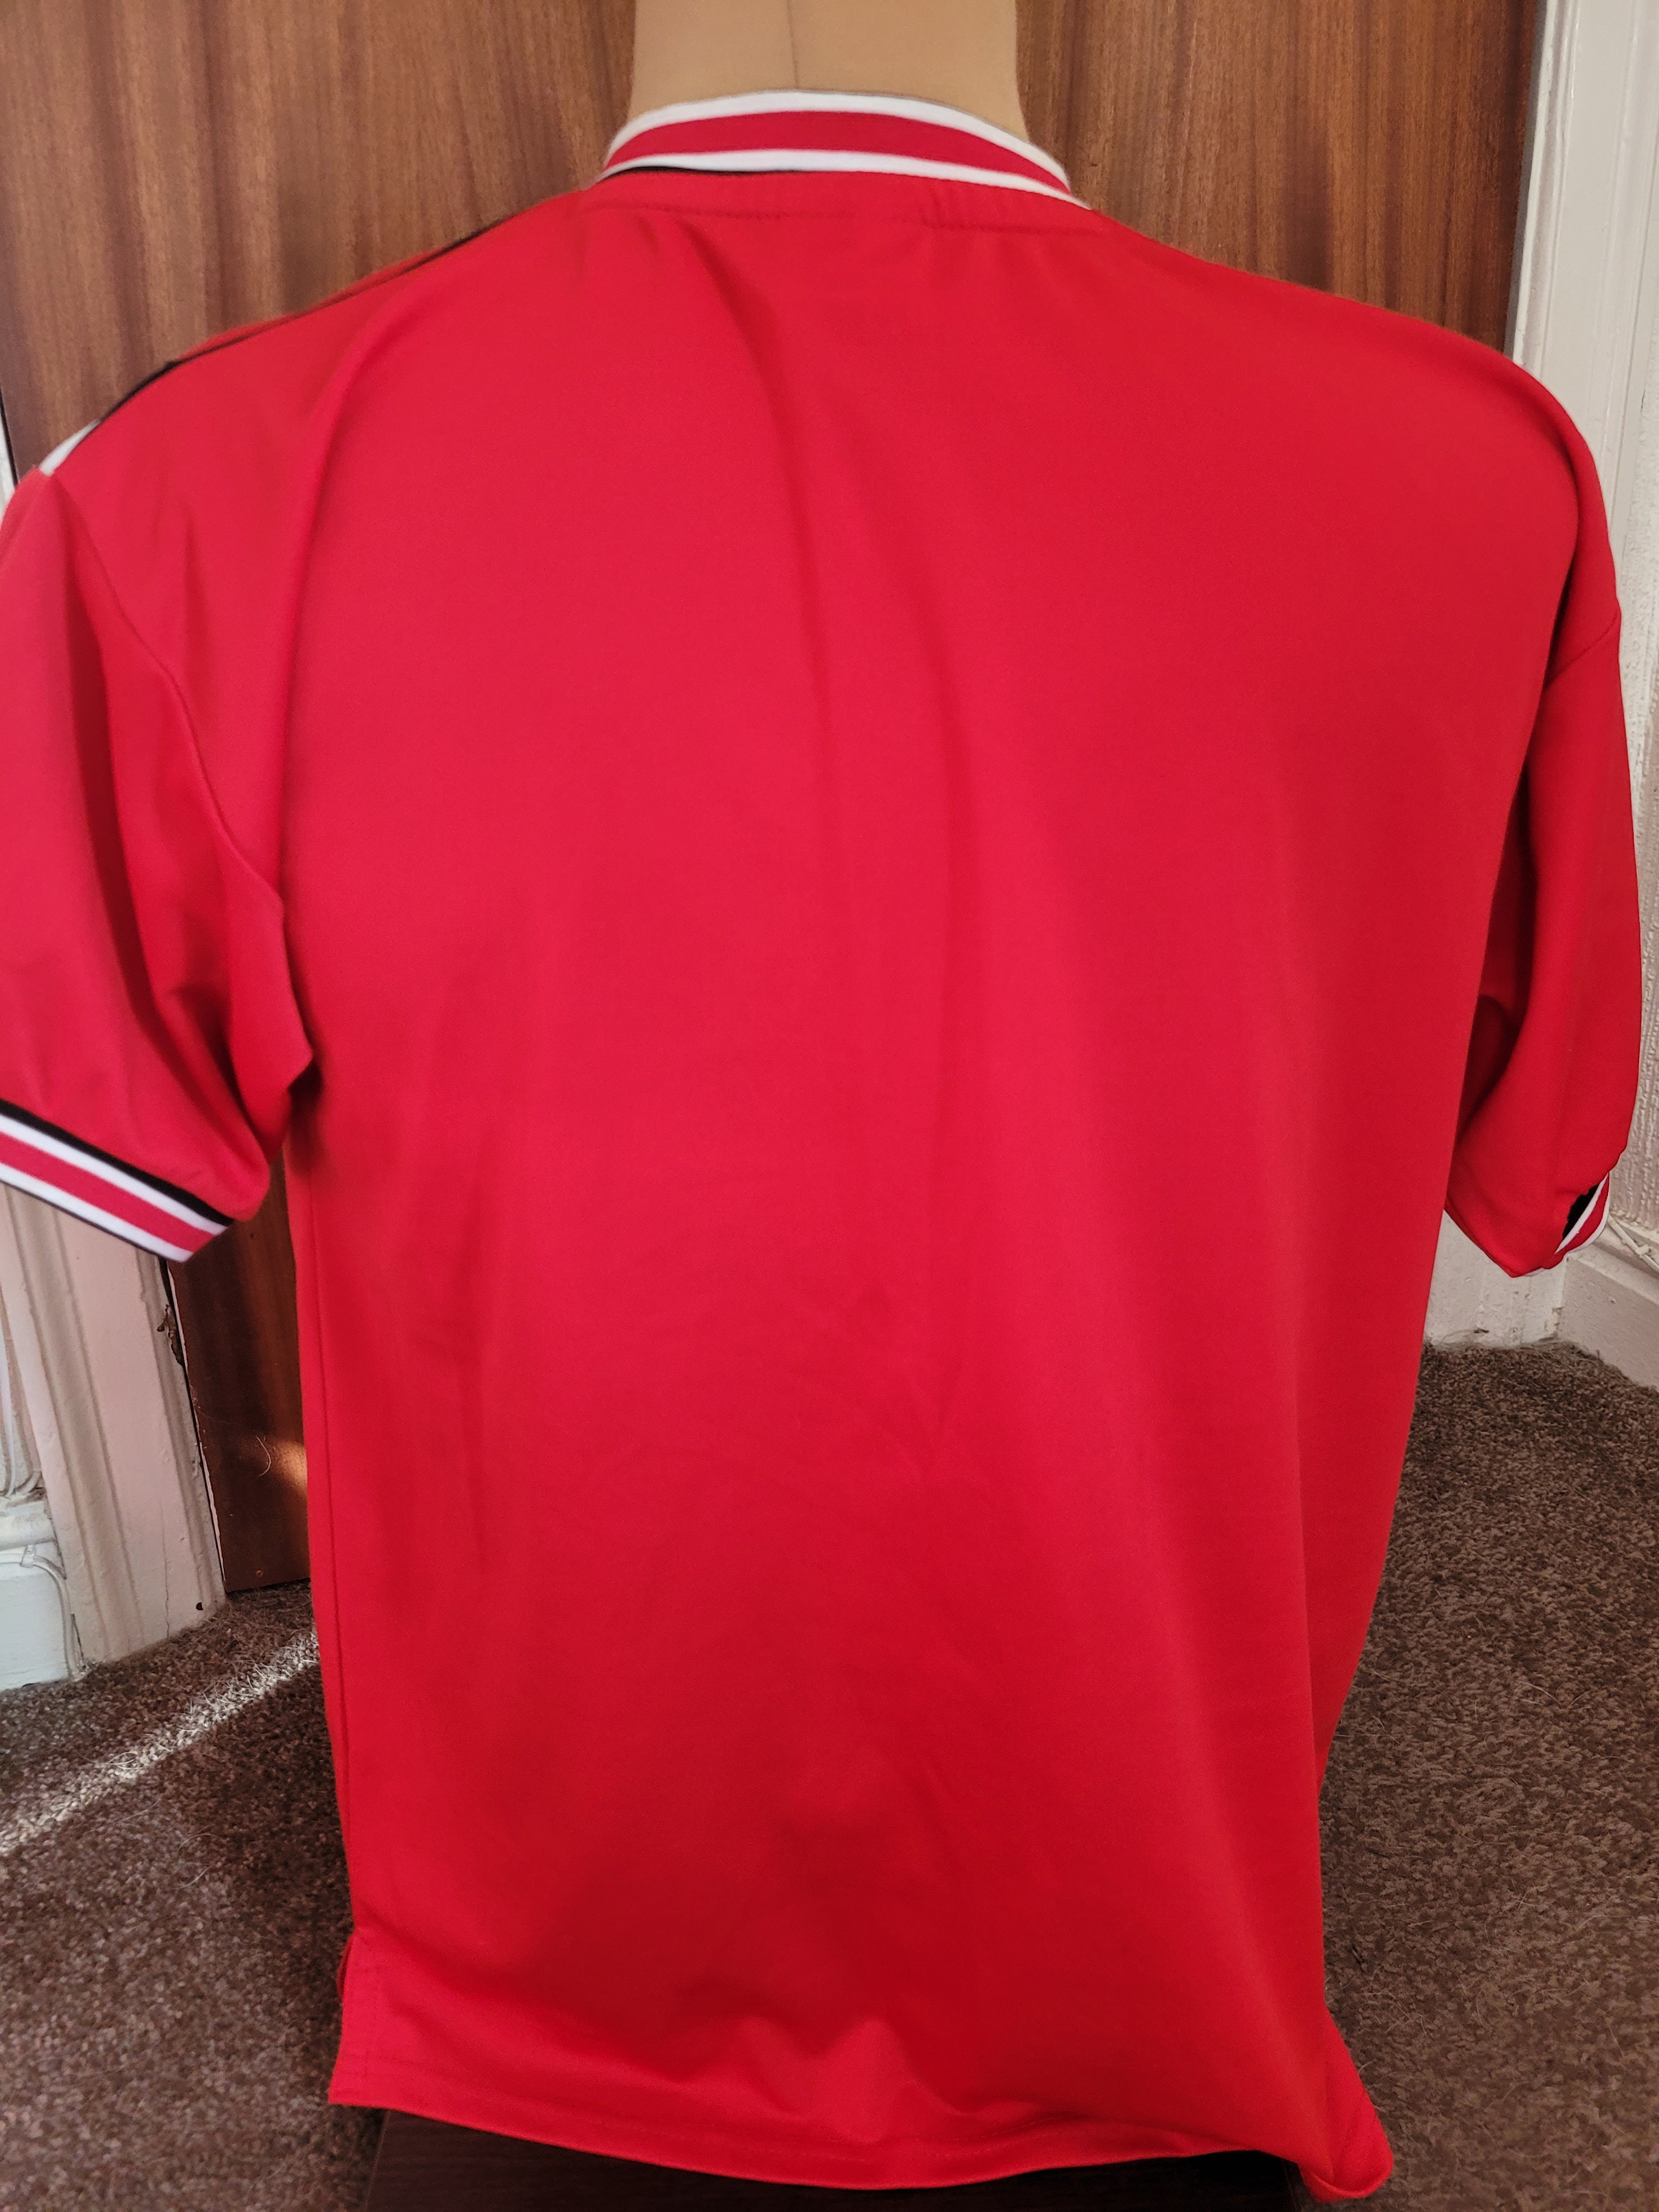 MANCHESTER UNITED 1985 FA CUP FINAL OFFICIAL RETRO SHIRT - Image 2 of 3